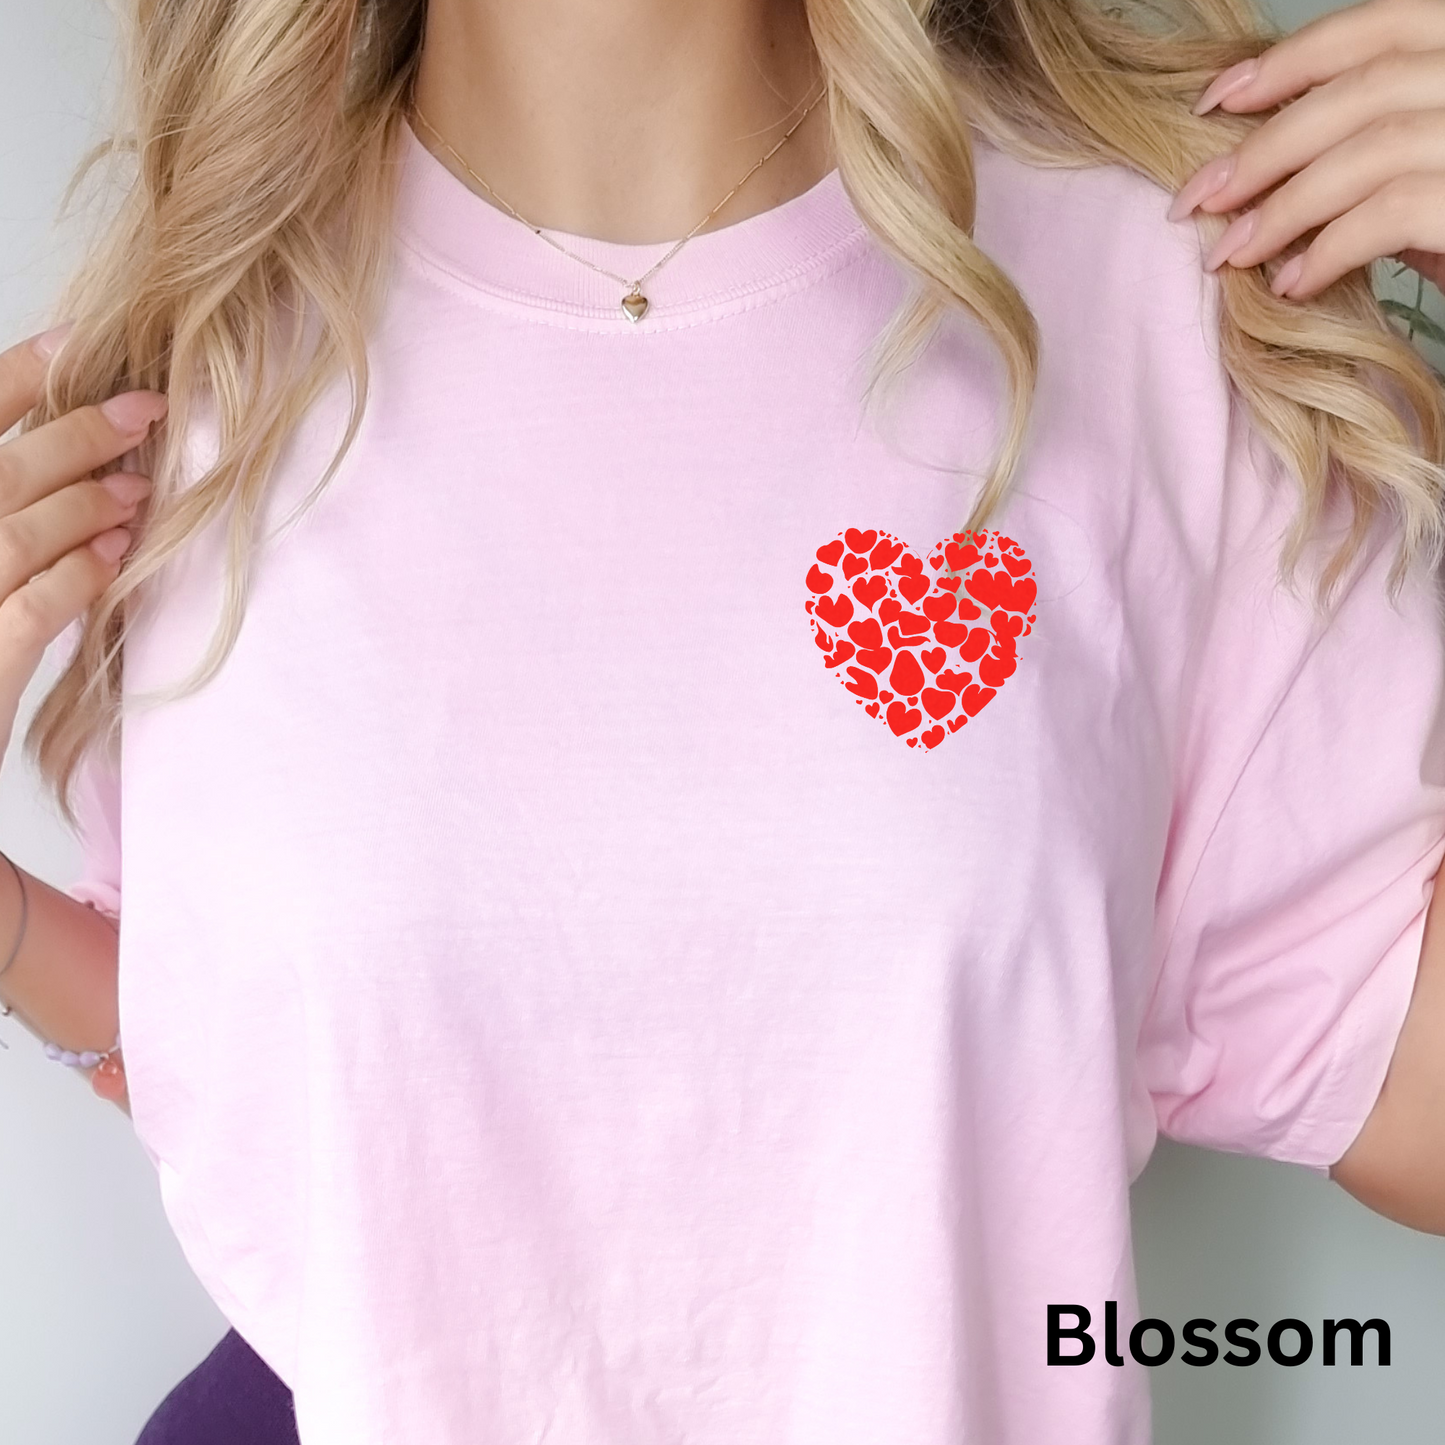 a woman wearing a pink shirt with a red heart on it